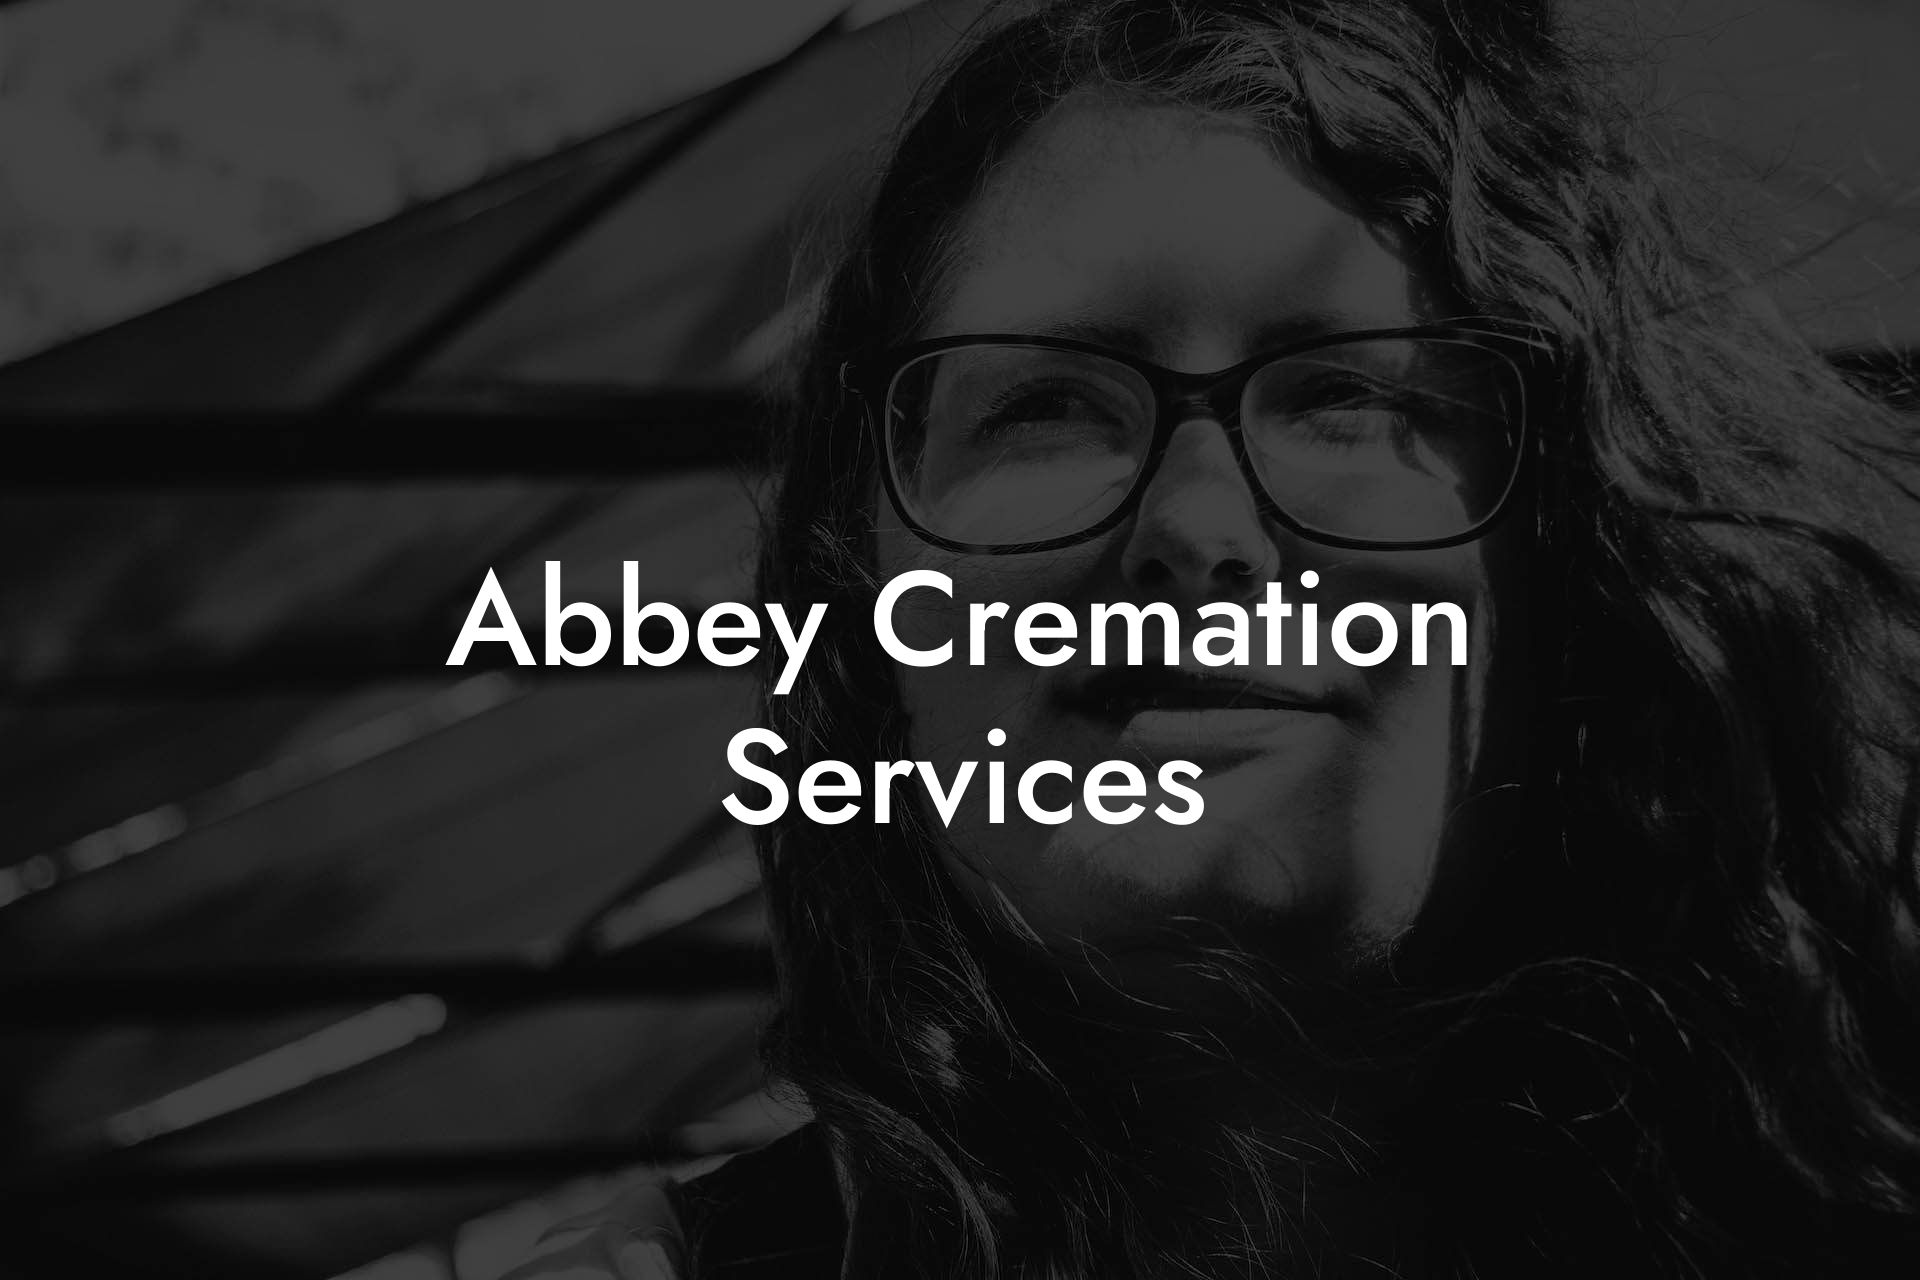 Abbey Cremation Services